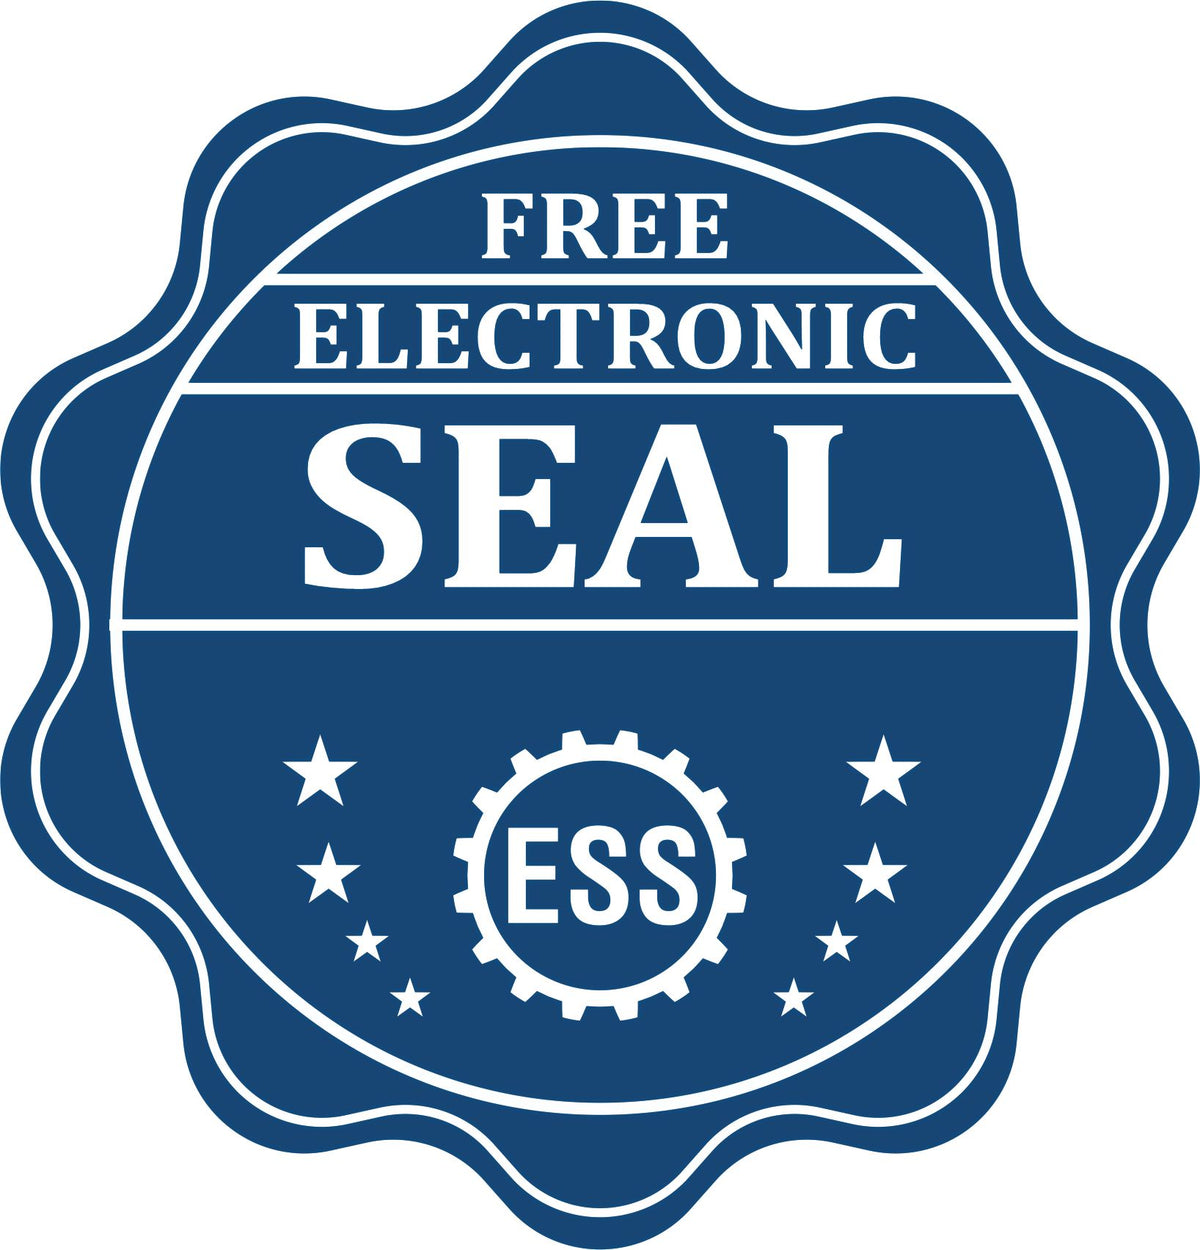 A badge showing a free electronic seal for the Super Slim Delaware Notary Public Stamp with stars and the ESS gear on the emblem.